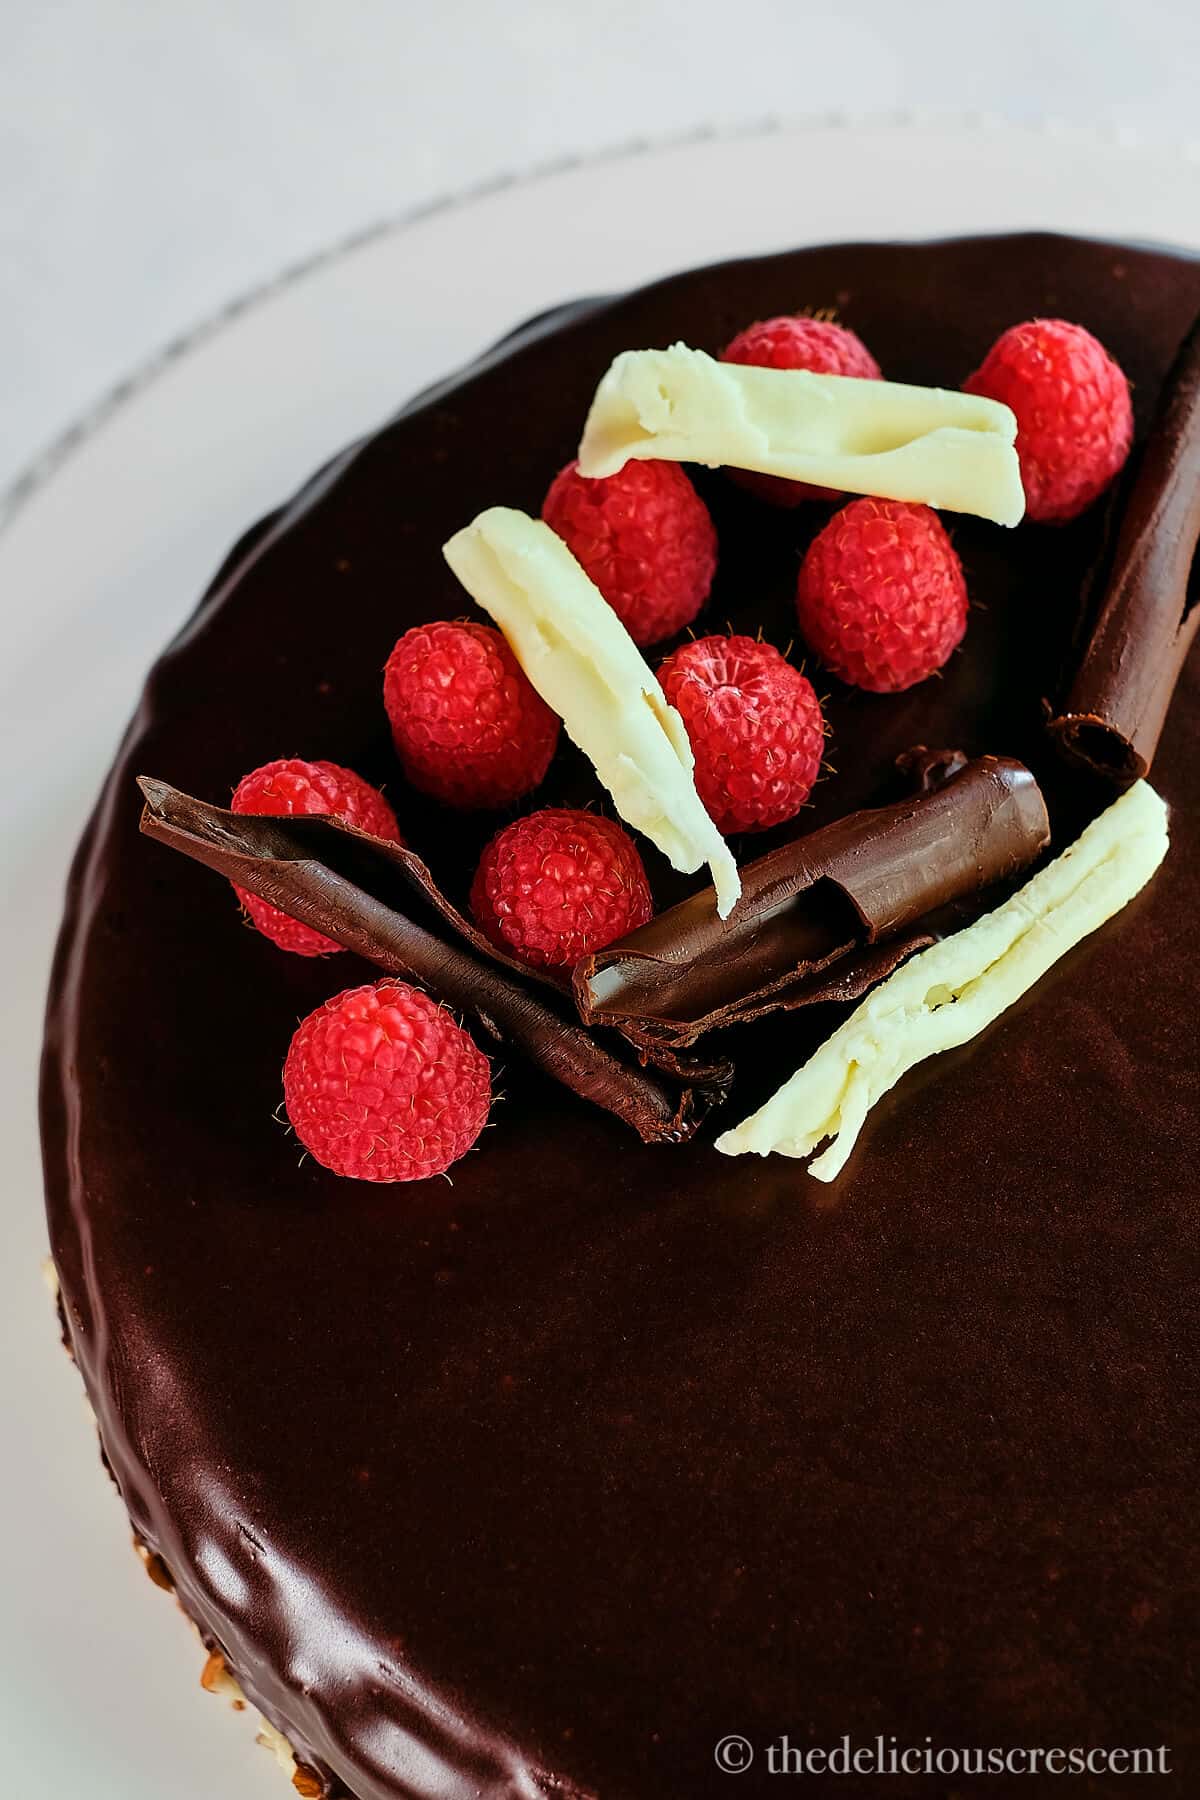 Top view of chocolate almond cake with fresh raspberries and chocolate curls.